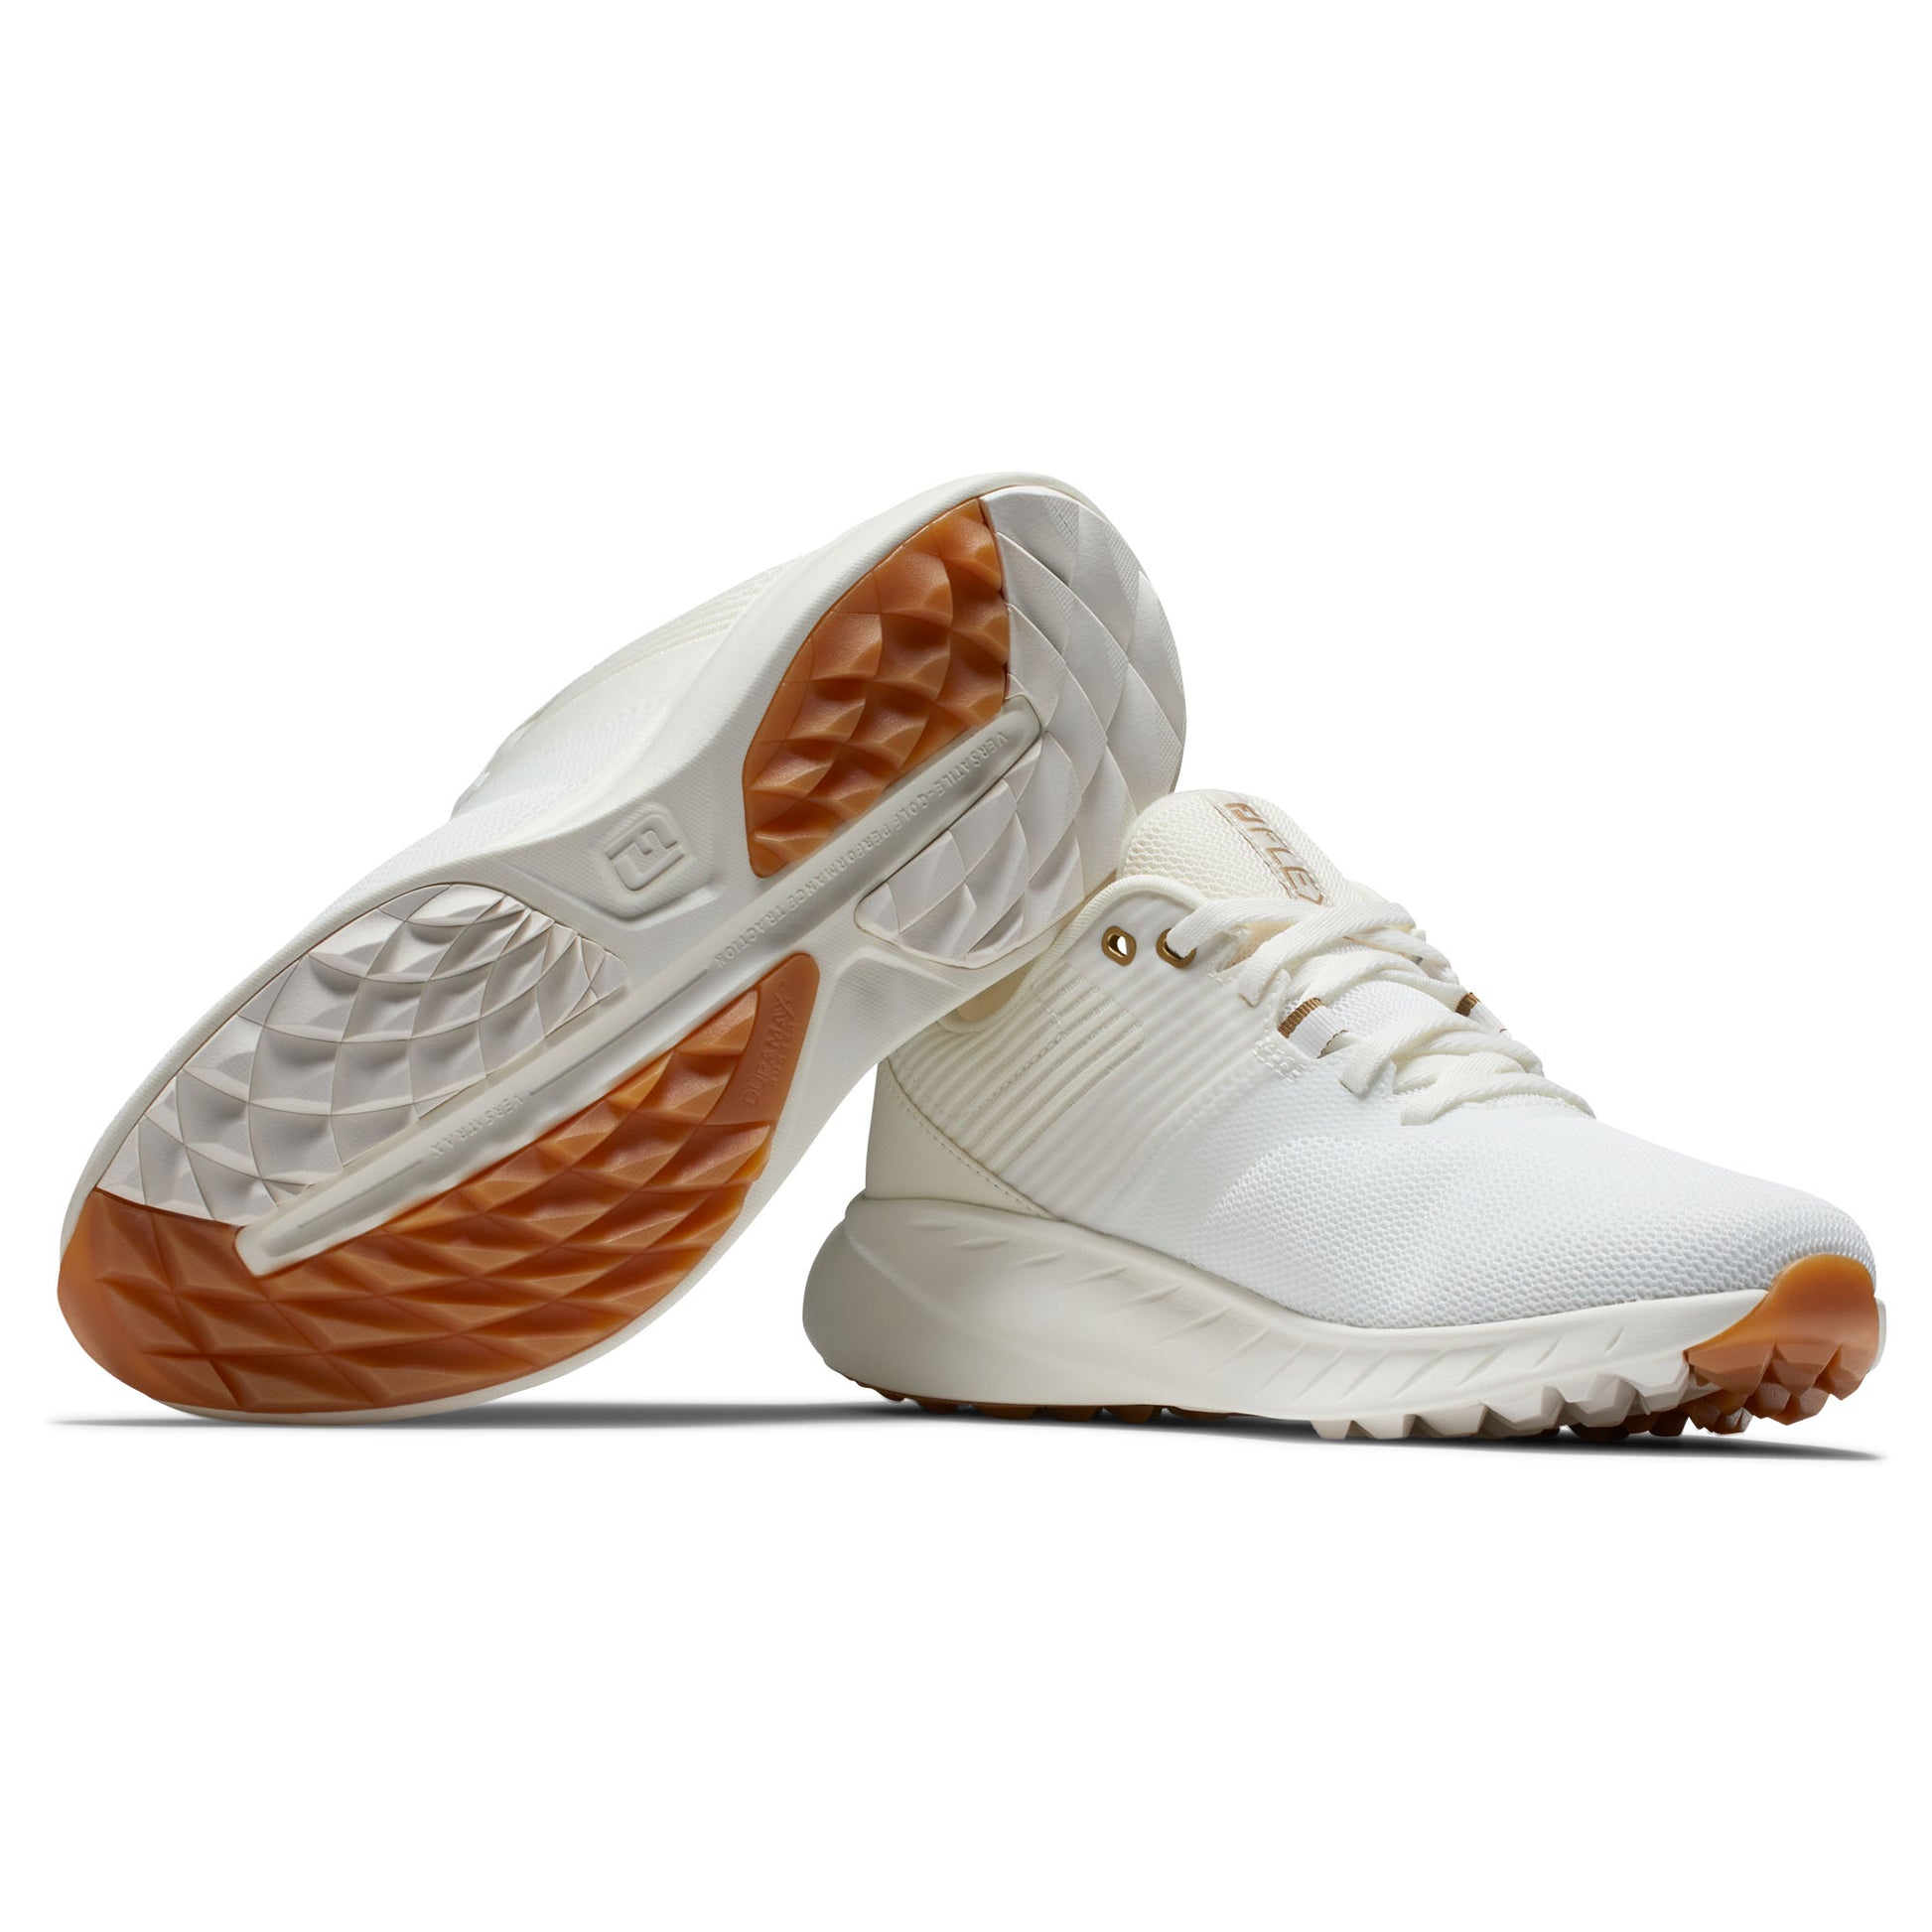 FootJoy Ladies Spikeless Flex Golf Shoes in White and Beige